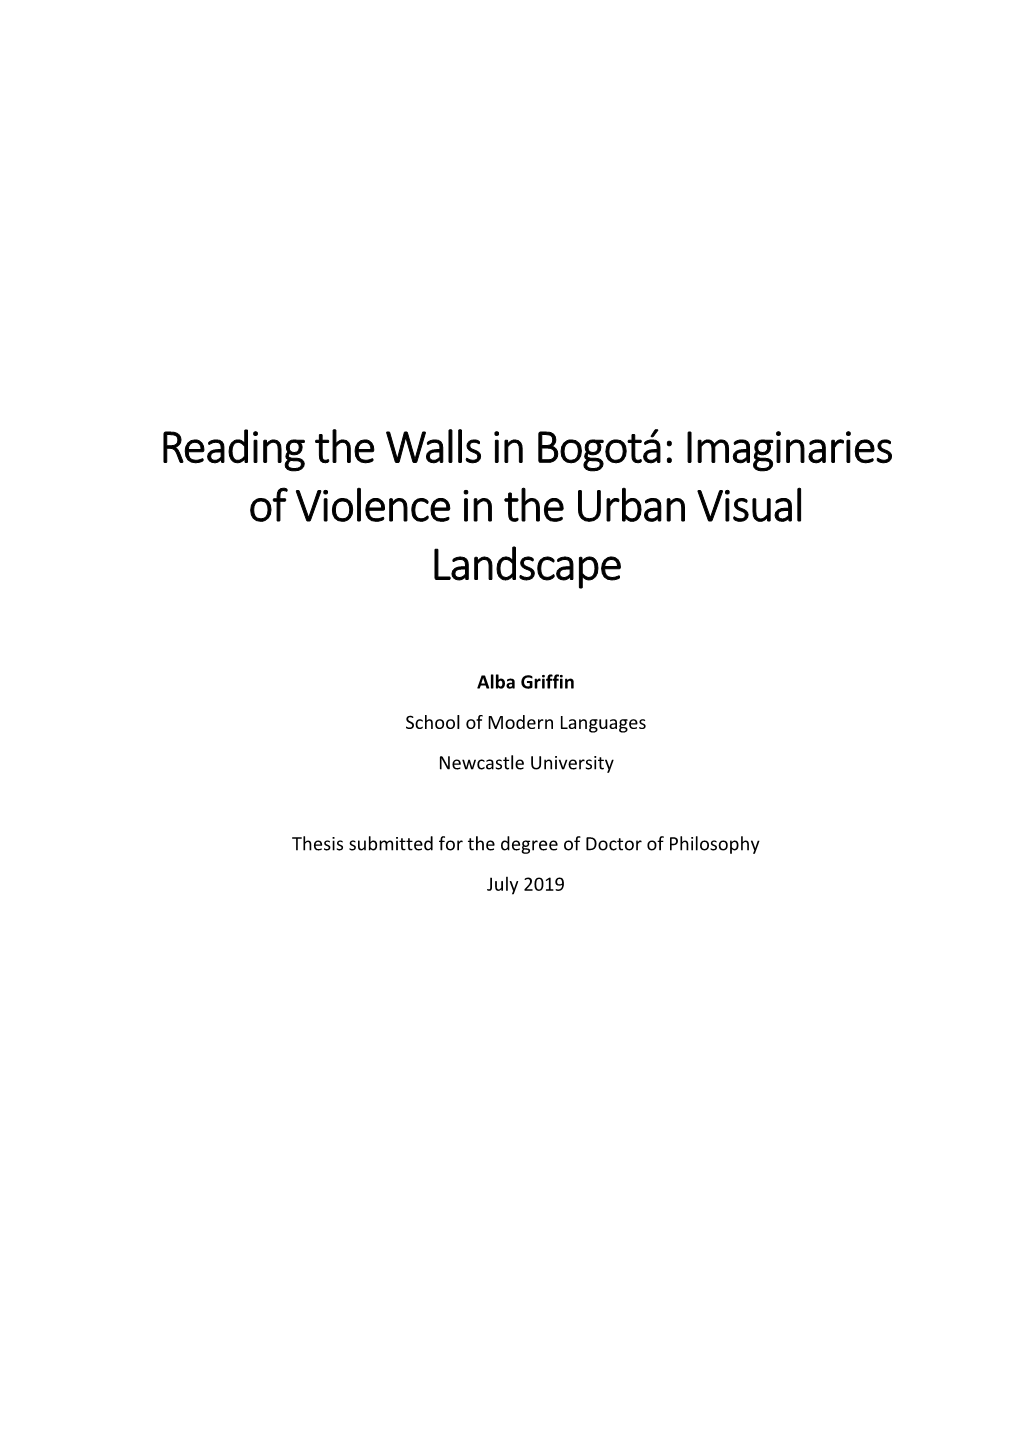 Reading the Walls in Bogotá: Imaginaries of Violence in the Urban Visual Landscape